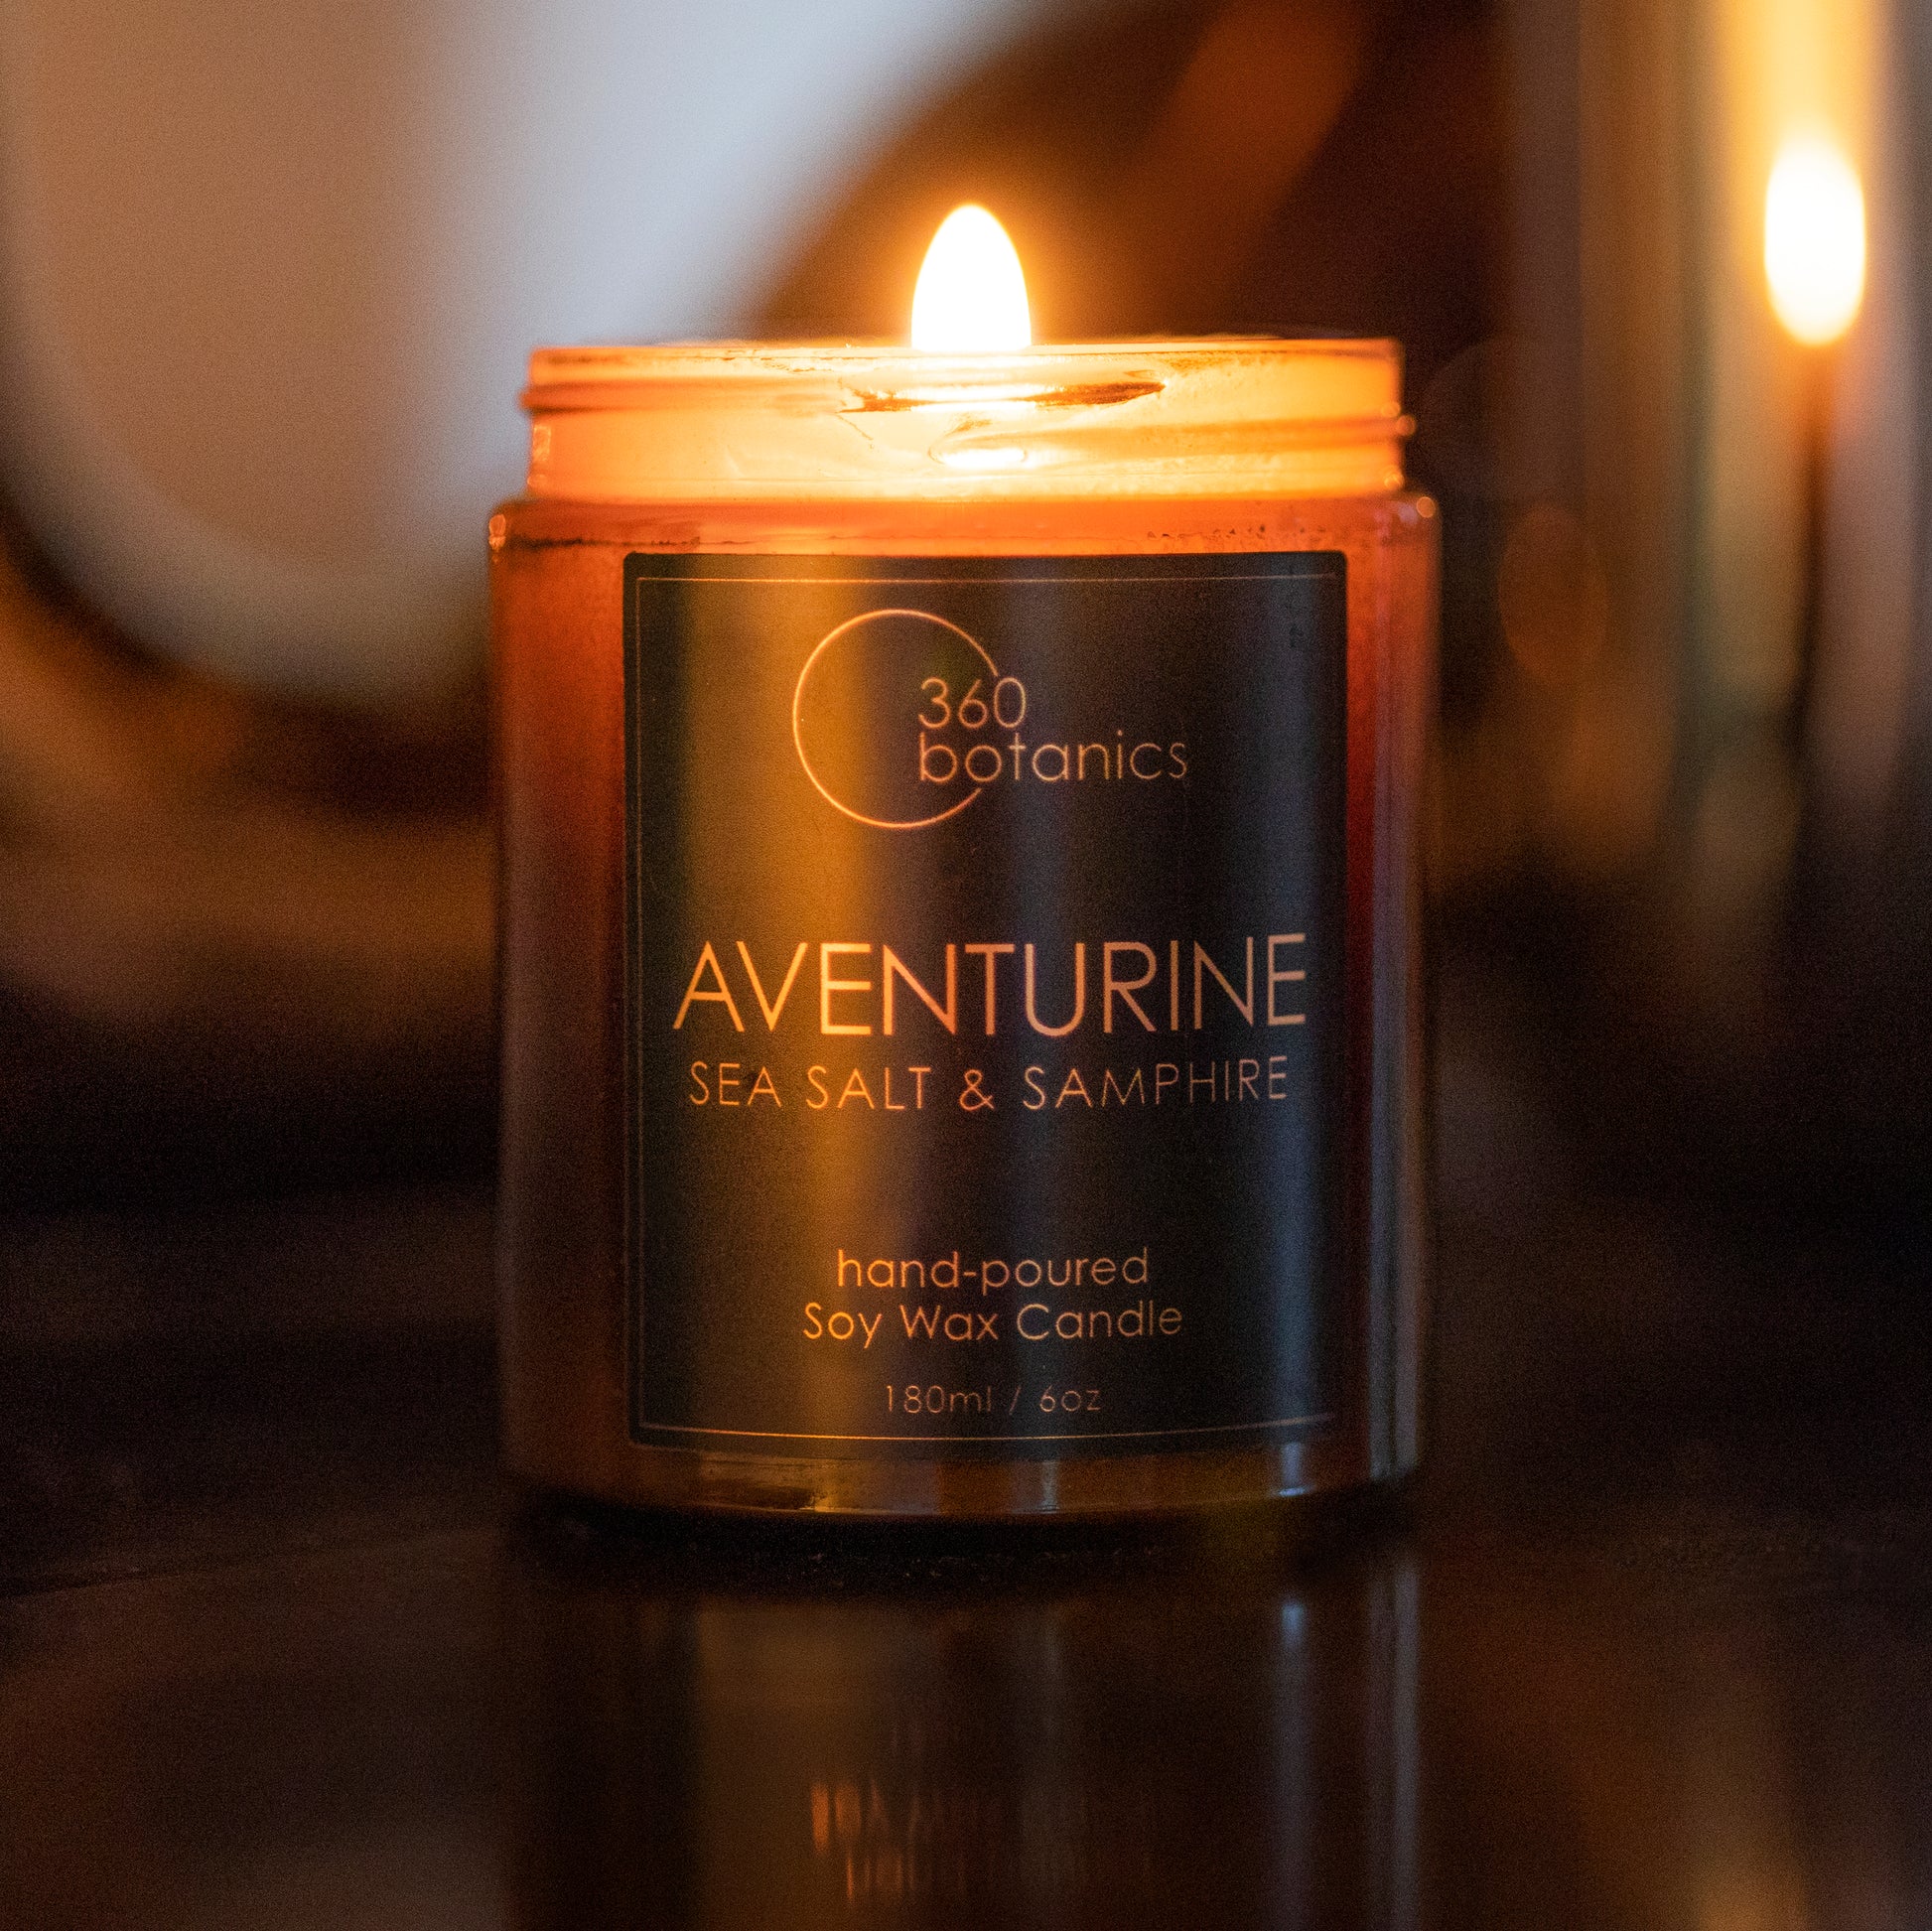 A glowing Aventurine hand-poured soy wax candle by 360 Botanics with 'Sea Salt & Samphire' scent, lit and casting a warm light in a dimly lit room, reflecting on a shiny surface